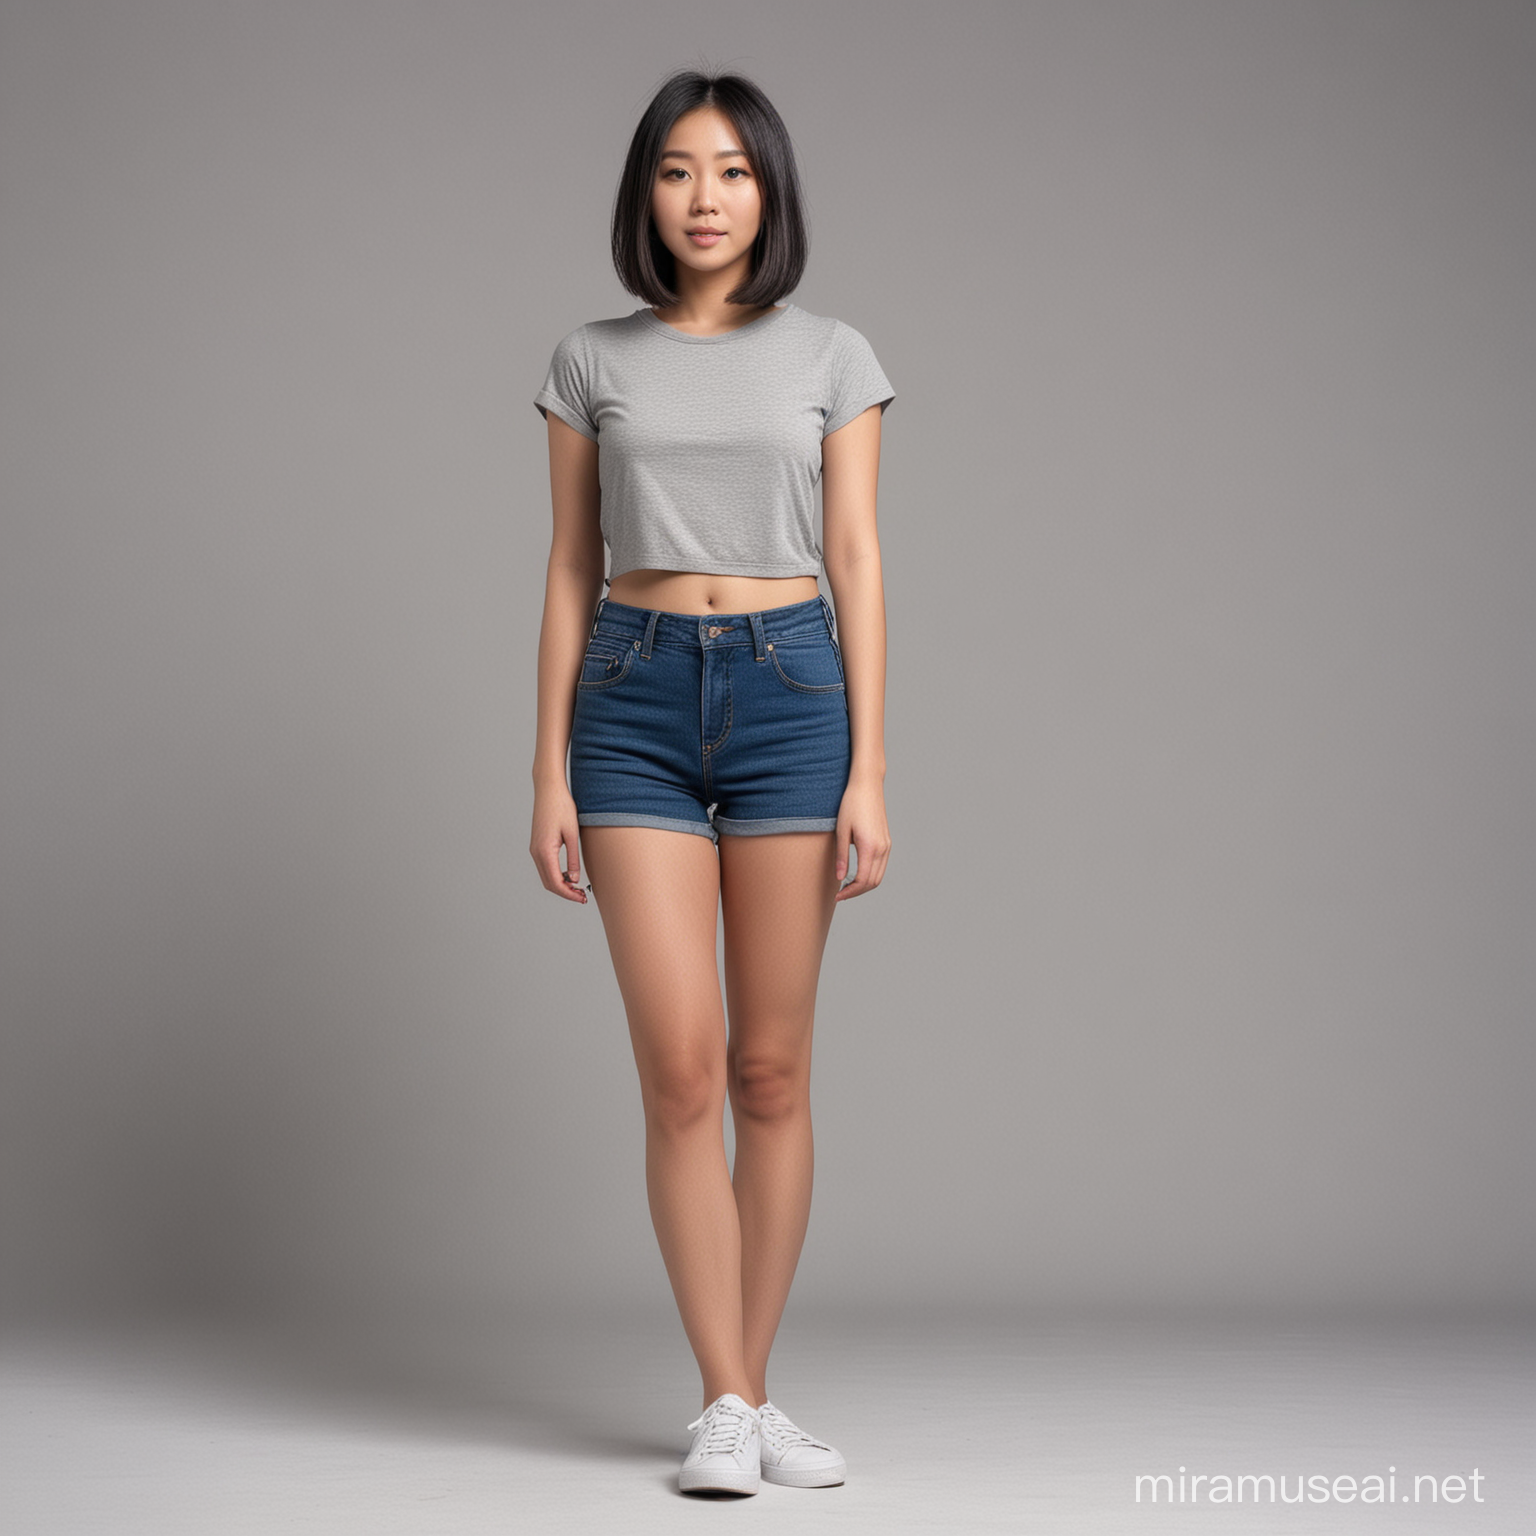 Elegant Asian Woman with Bob Hairstyle in Full Body Portrait